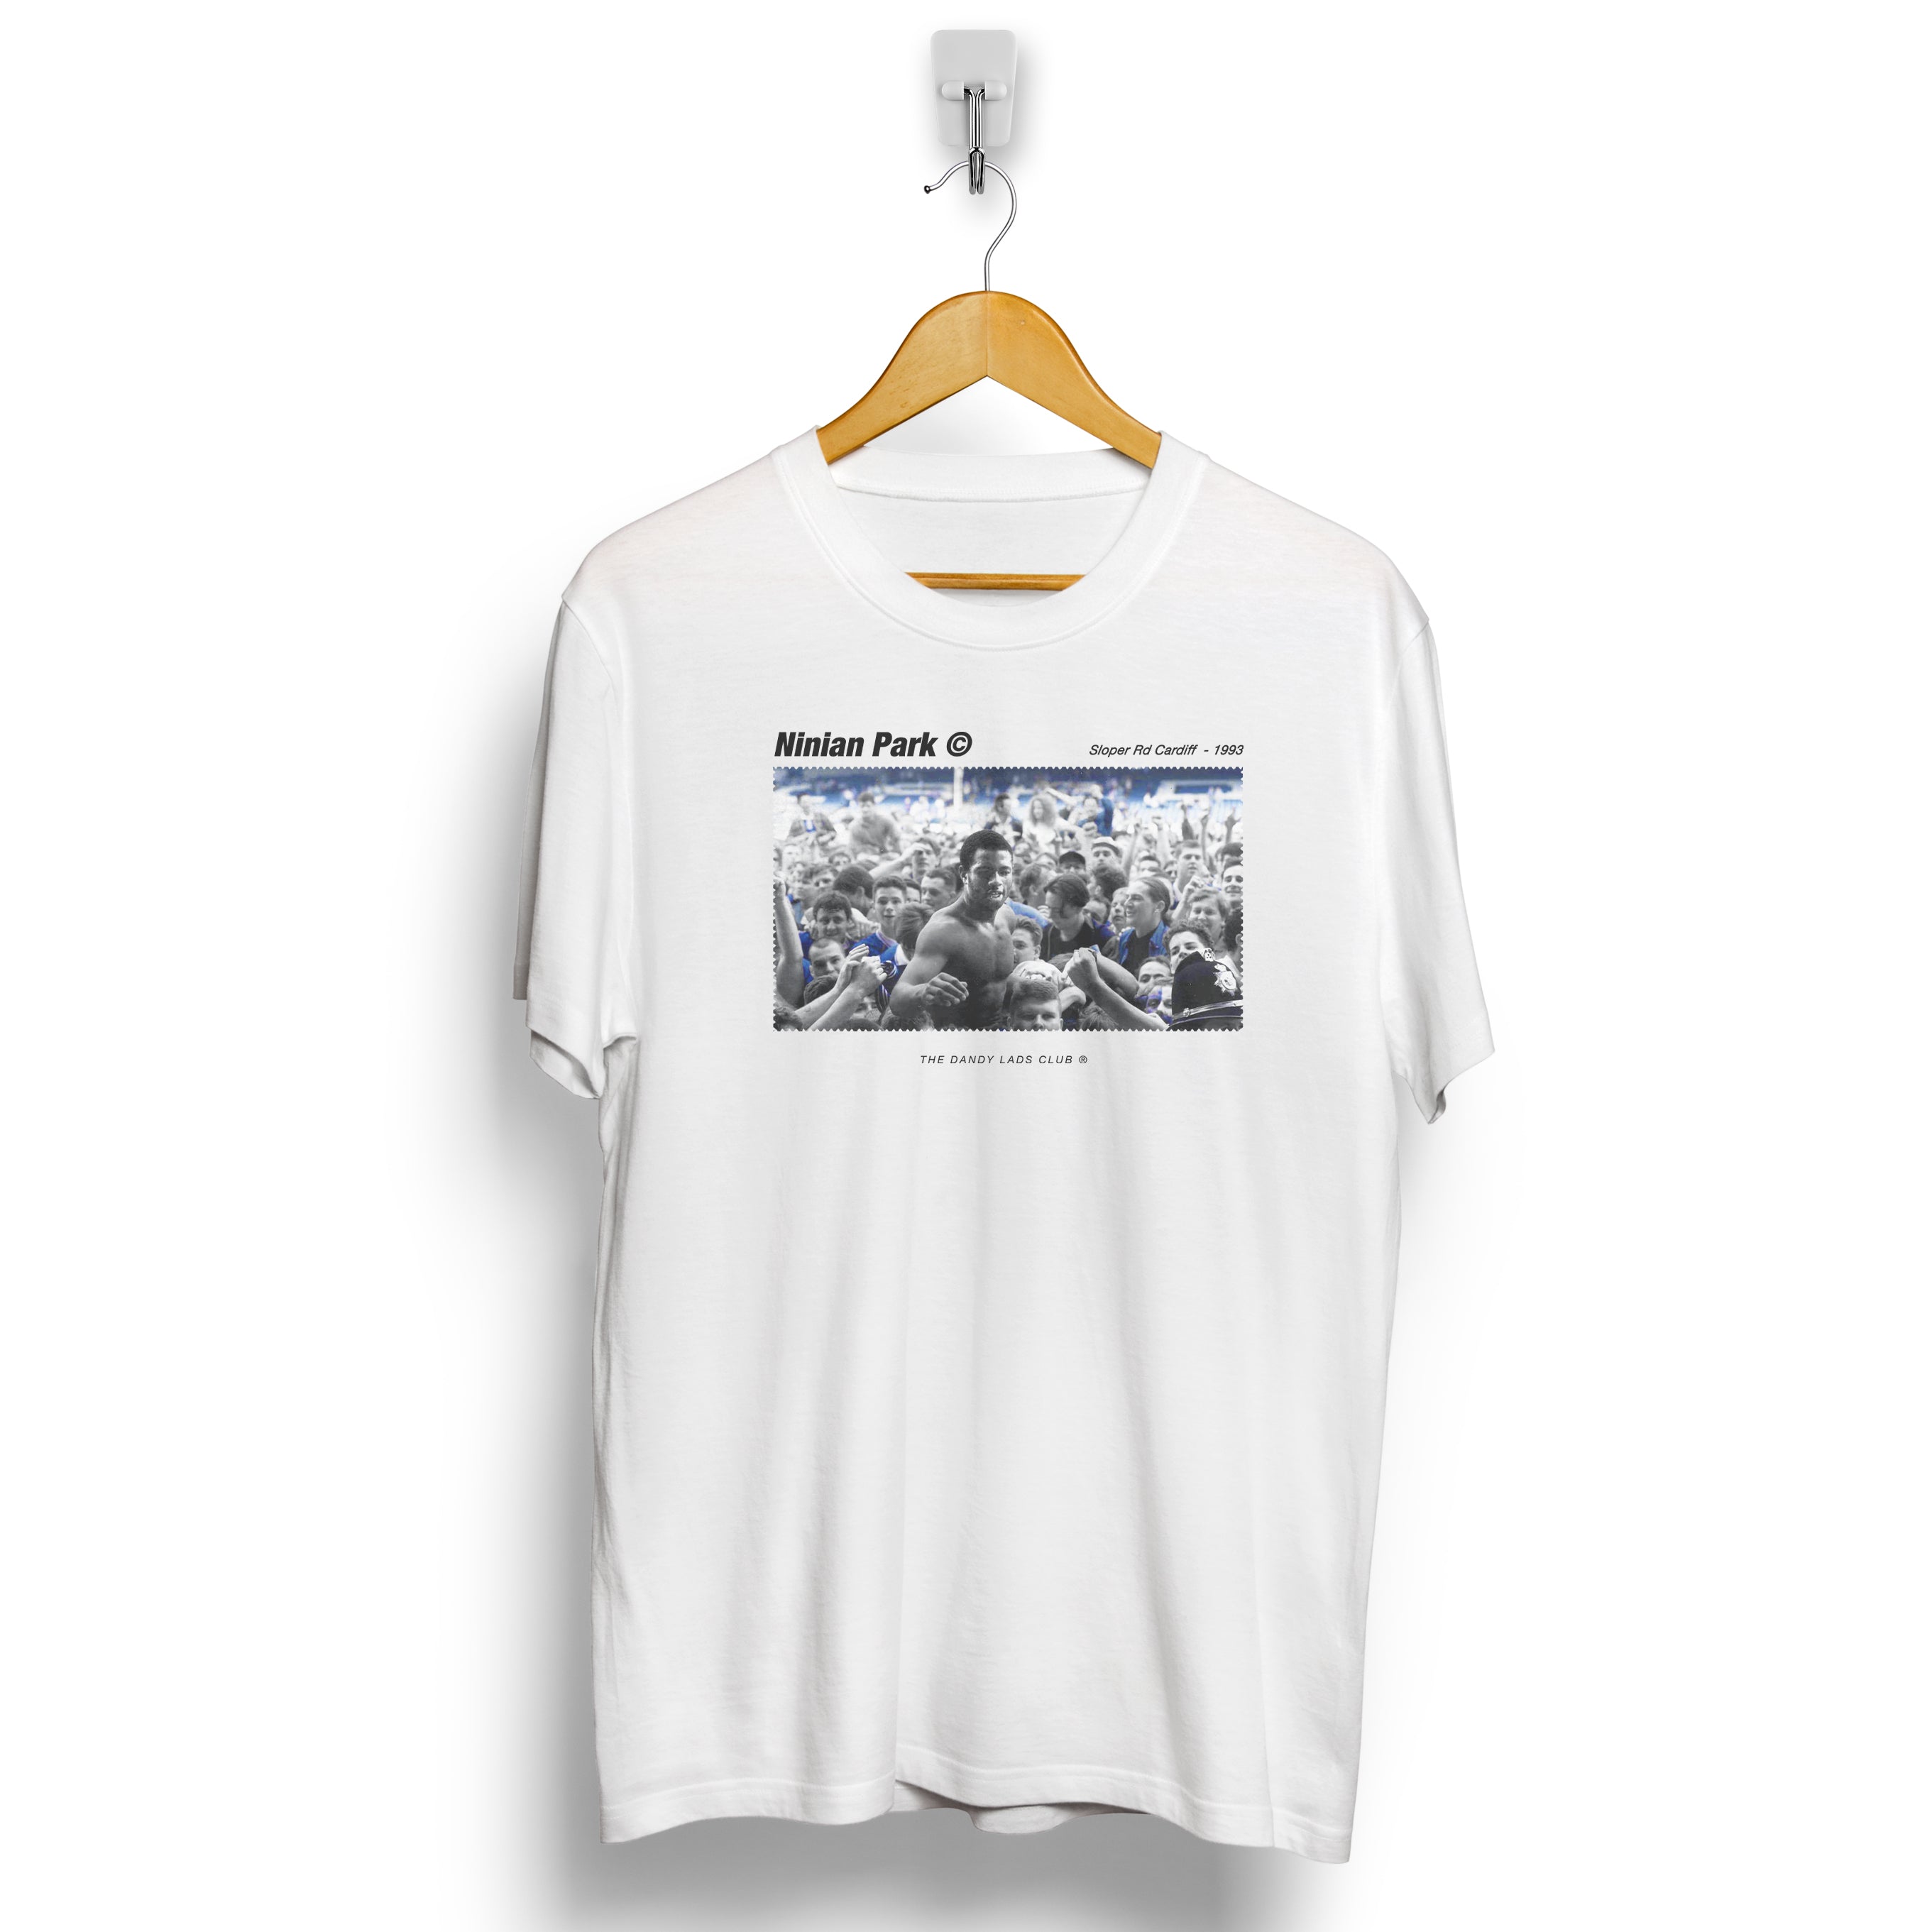 Promoted Cardiff Football Casuals Awaydays T Shirt